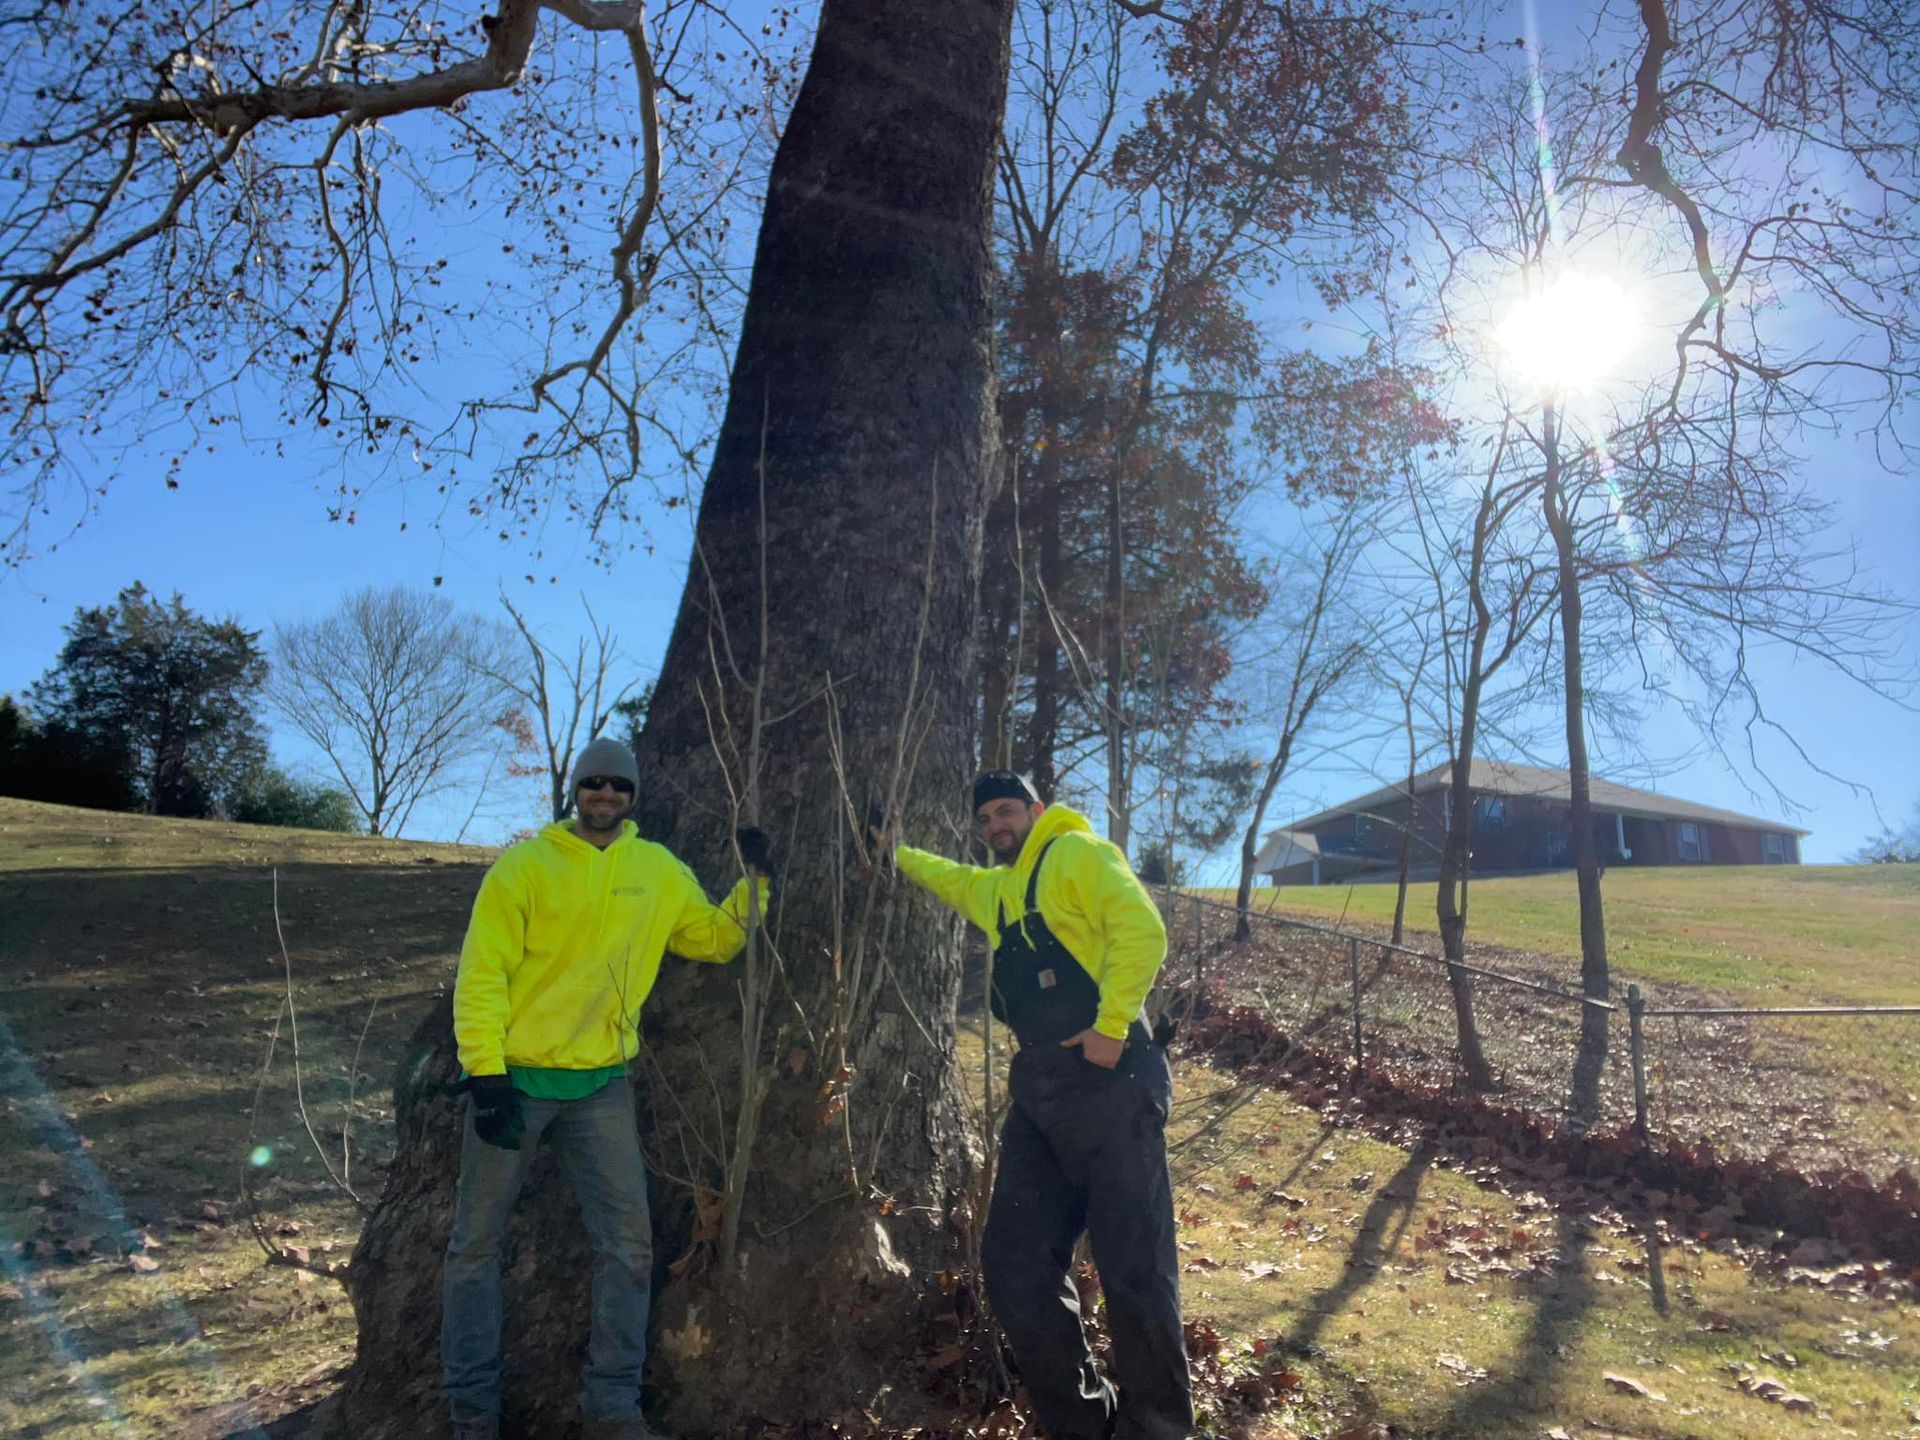 two men are standing next to a large tree in a field .